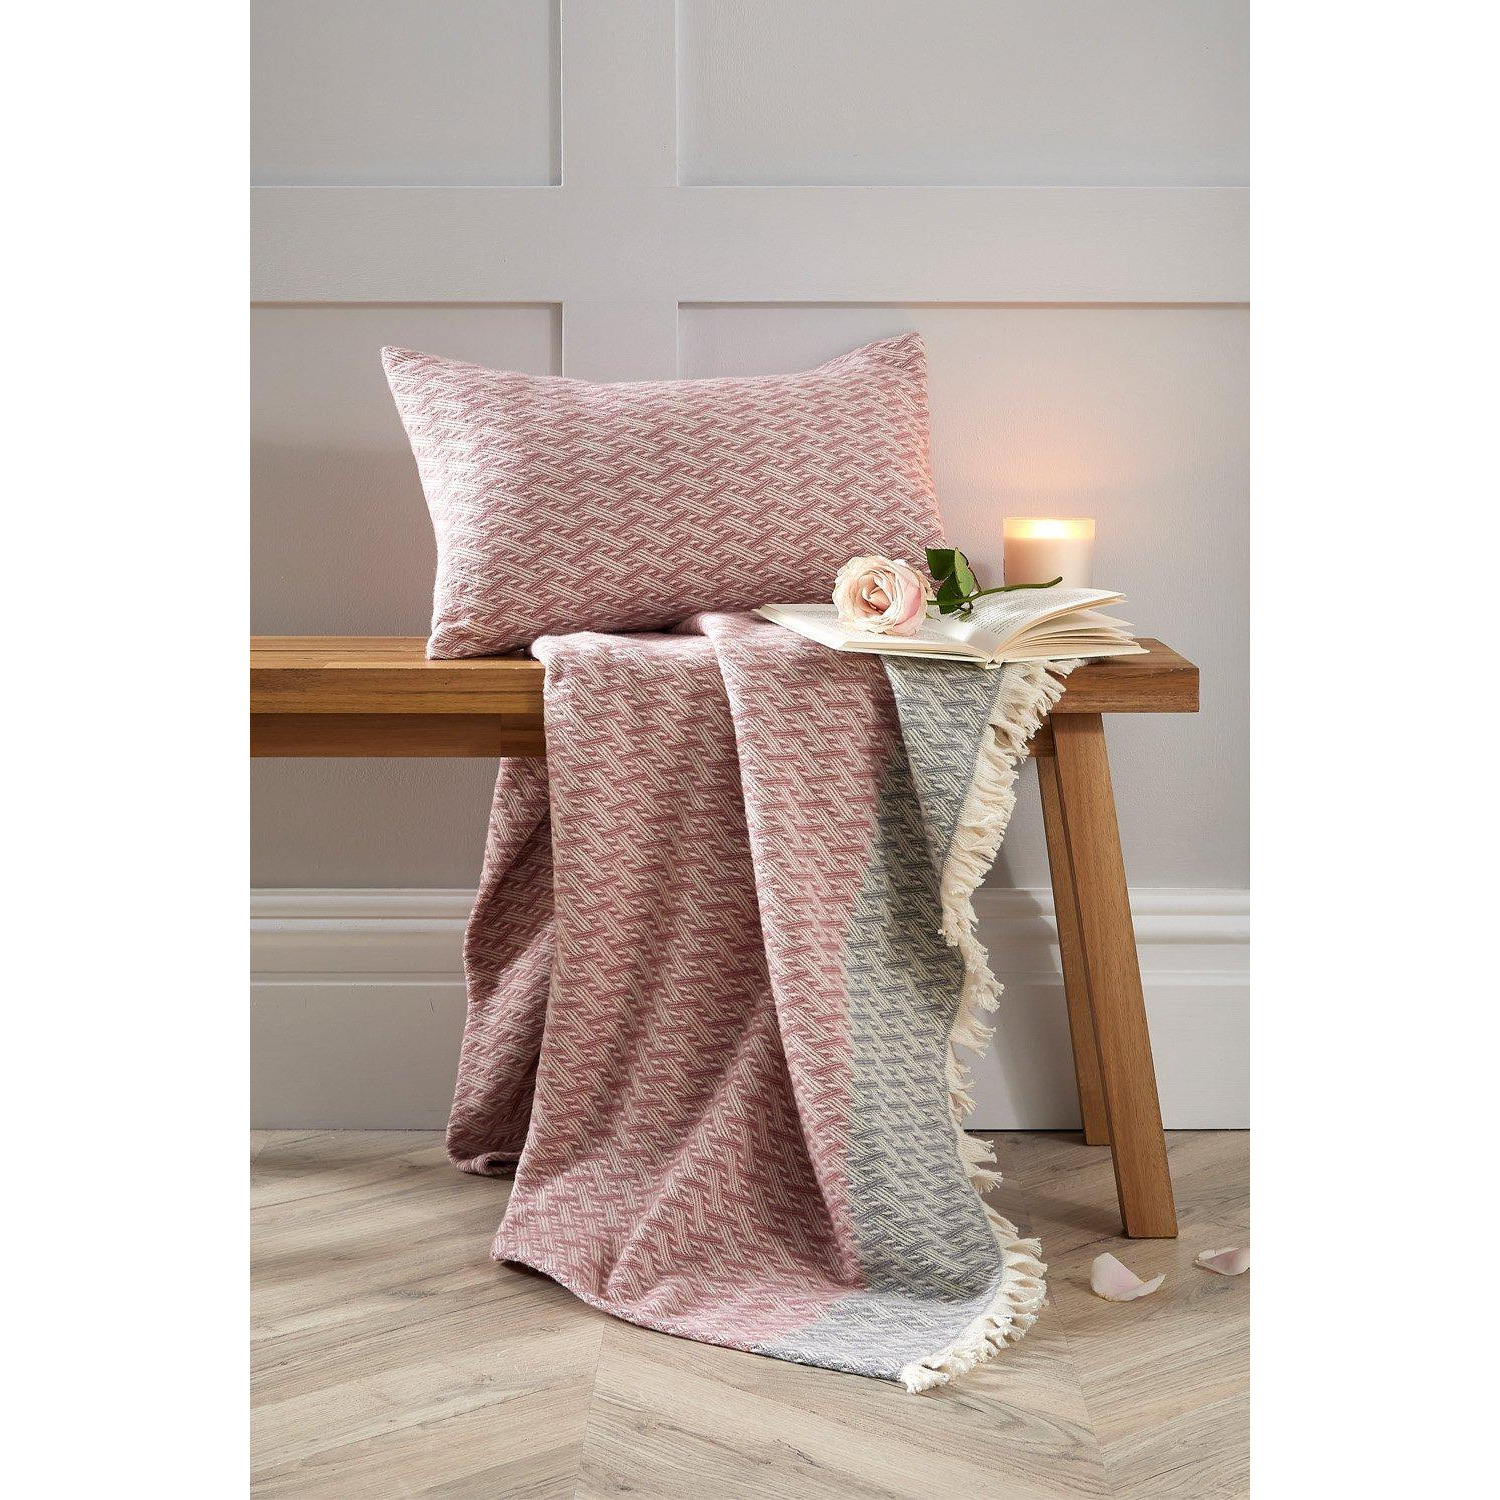 'Rosa' Woven Cotton Lilac Throw and Cushion Set - image 1